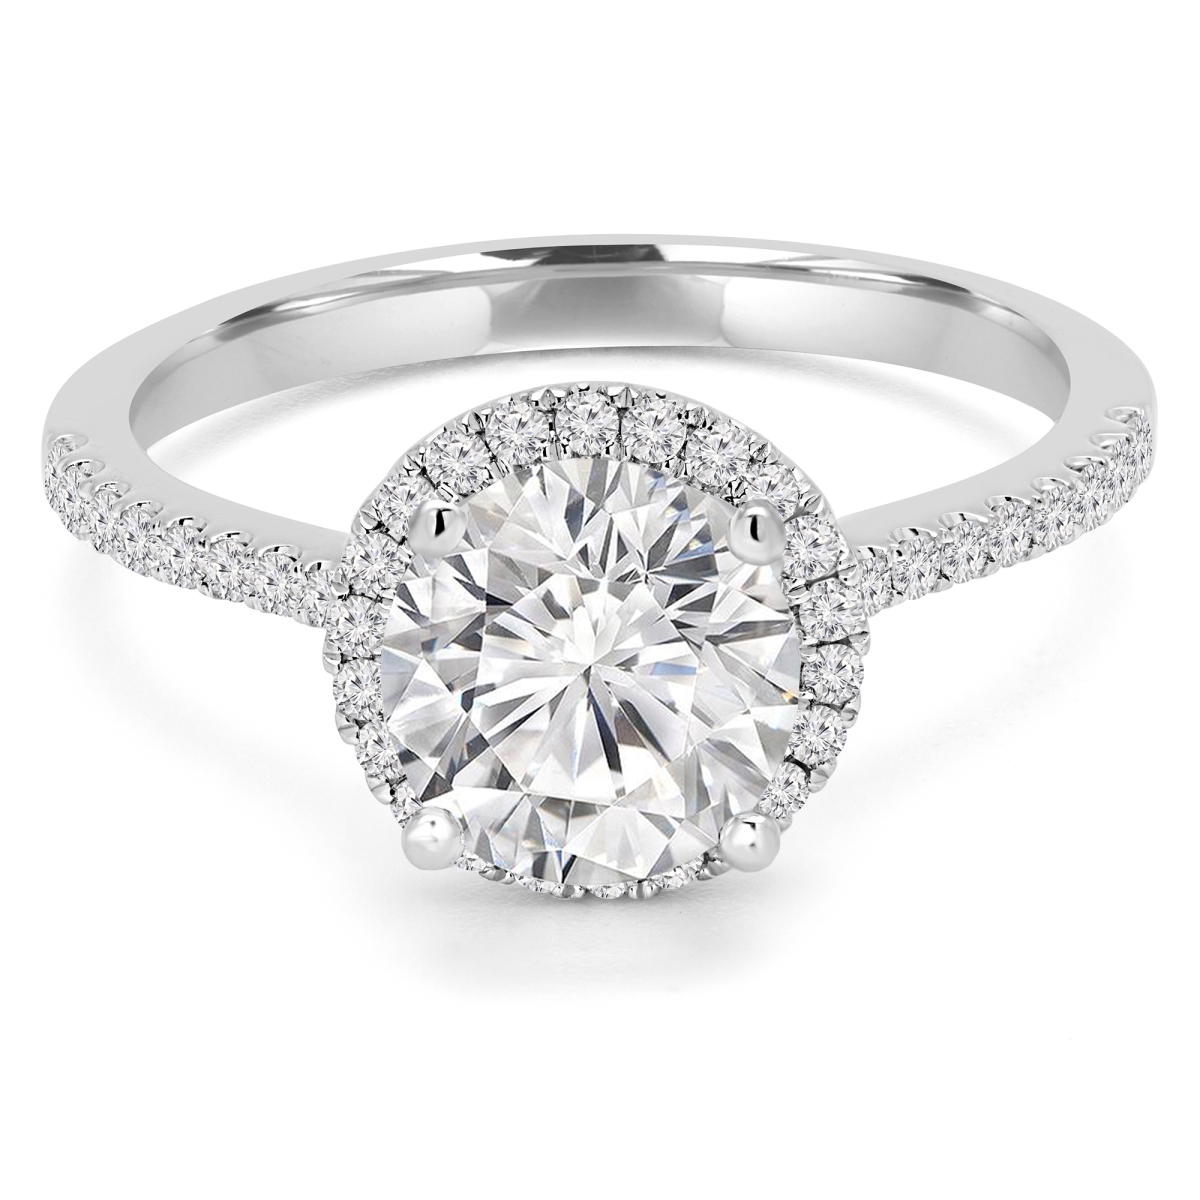 Picture of Majesty Diamonds MD190224-P 0.6 CTW Round Diamond Round Halo Engagement Ring in 14K White Gold